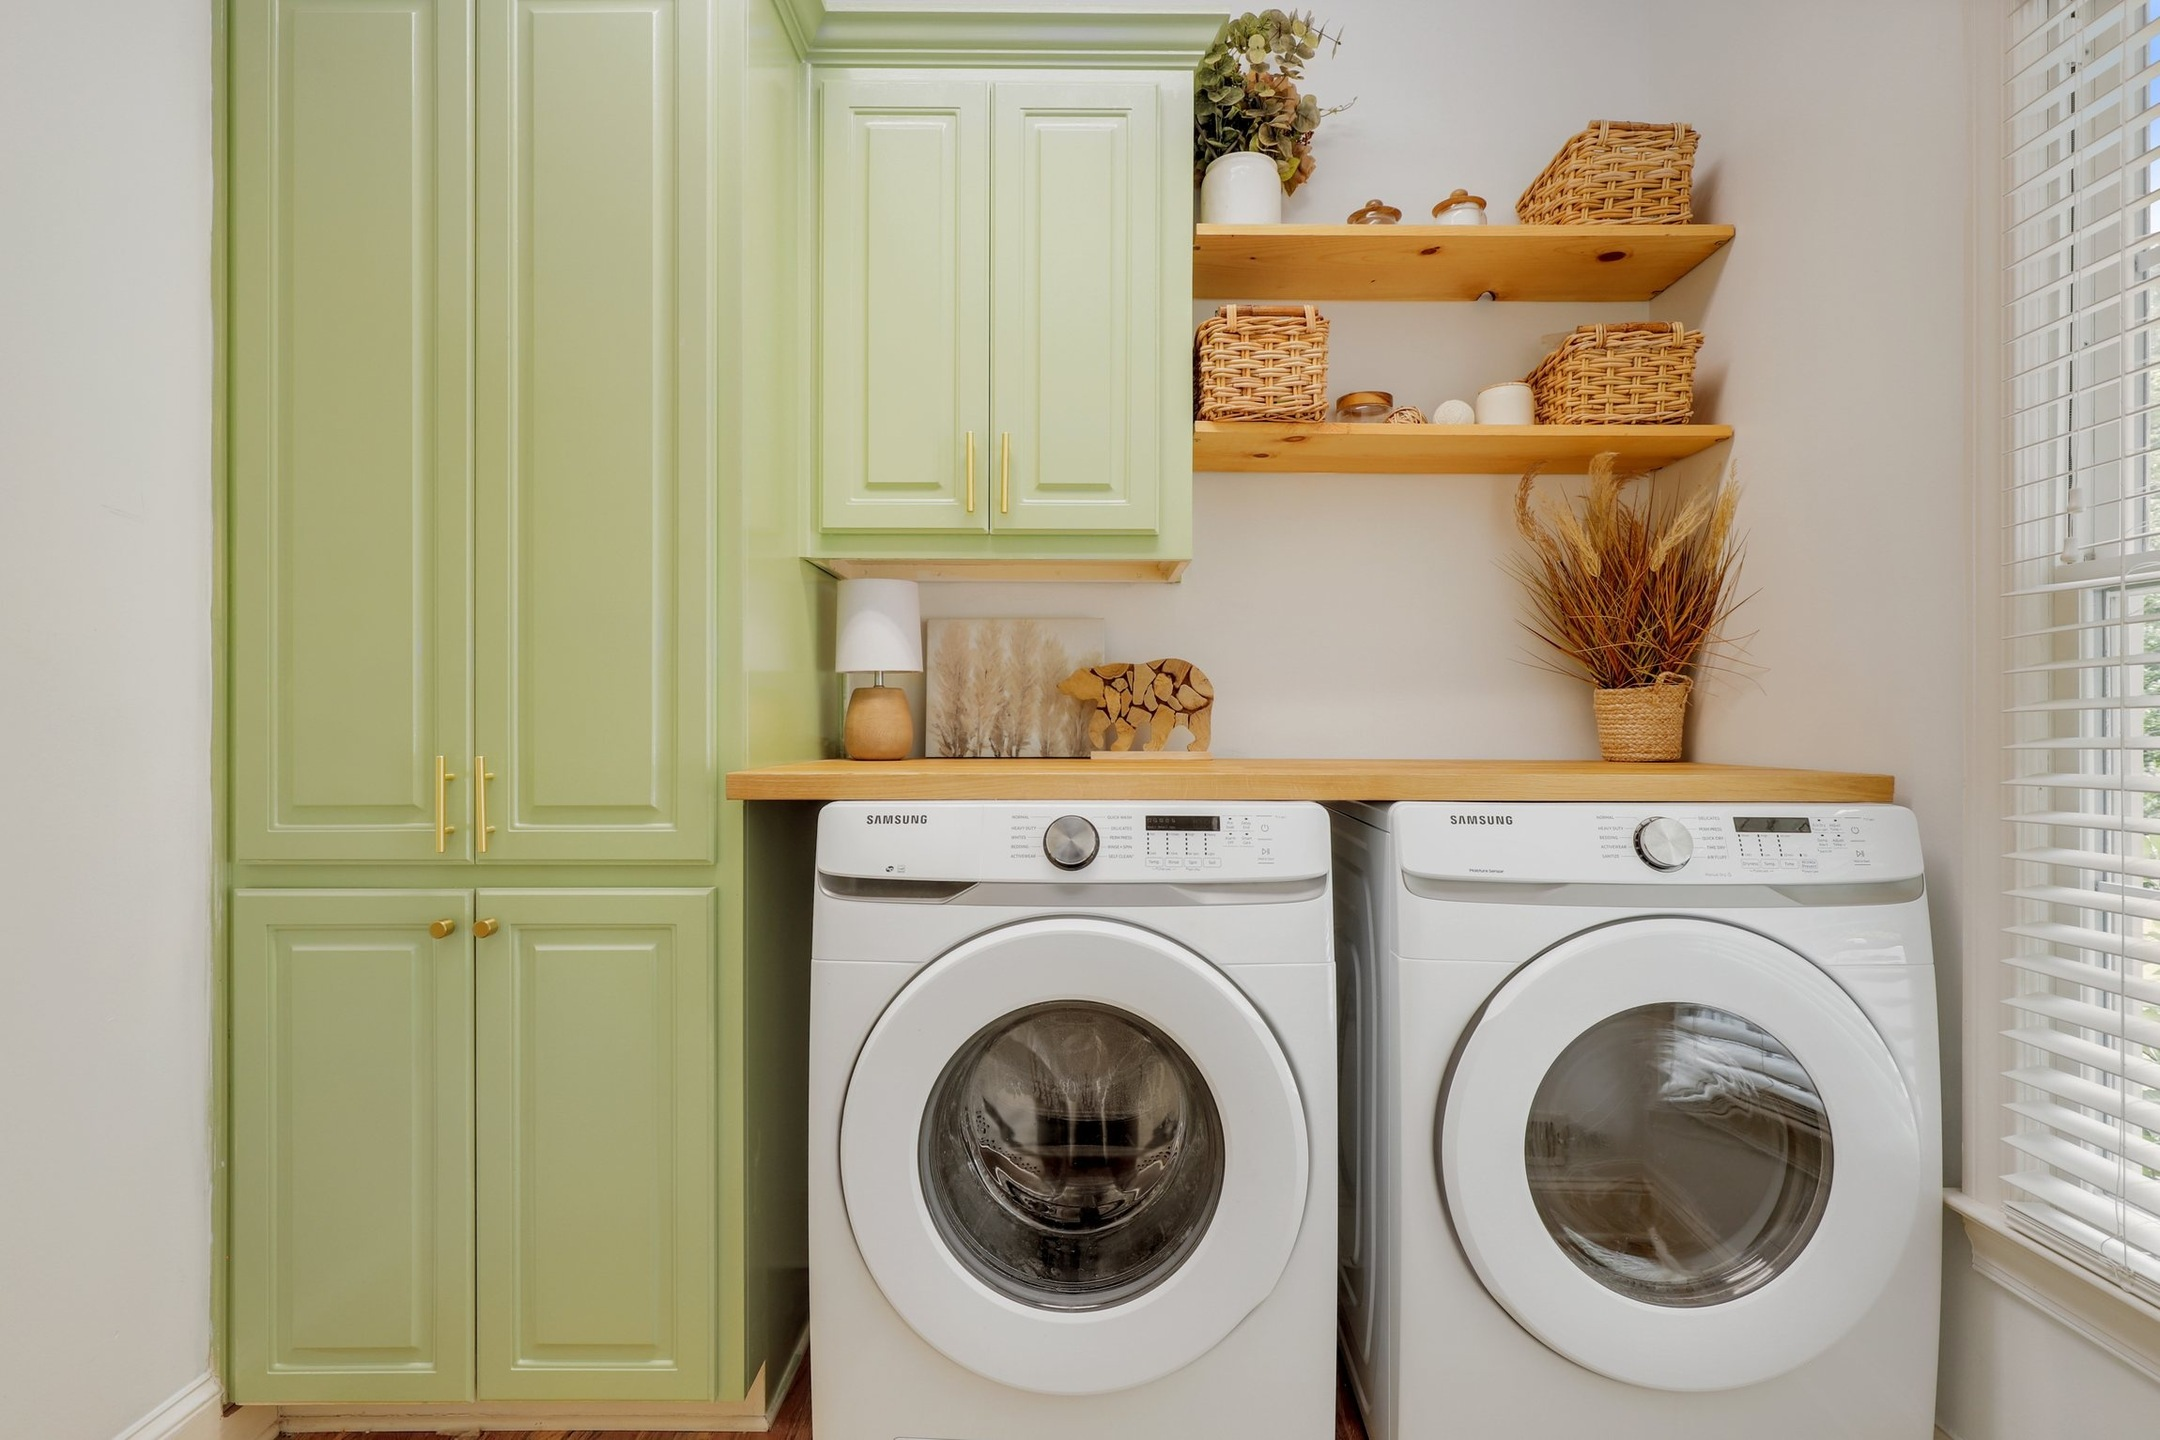 A washer and dryer combo in a dedicated laundry room of an apartment